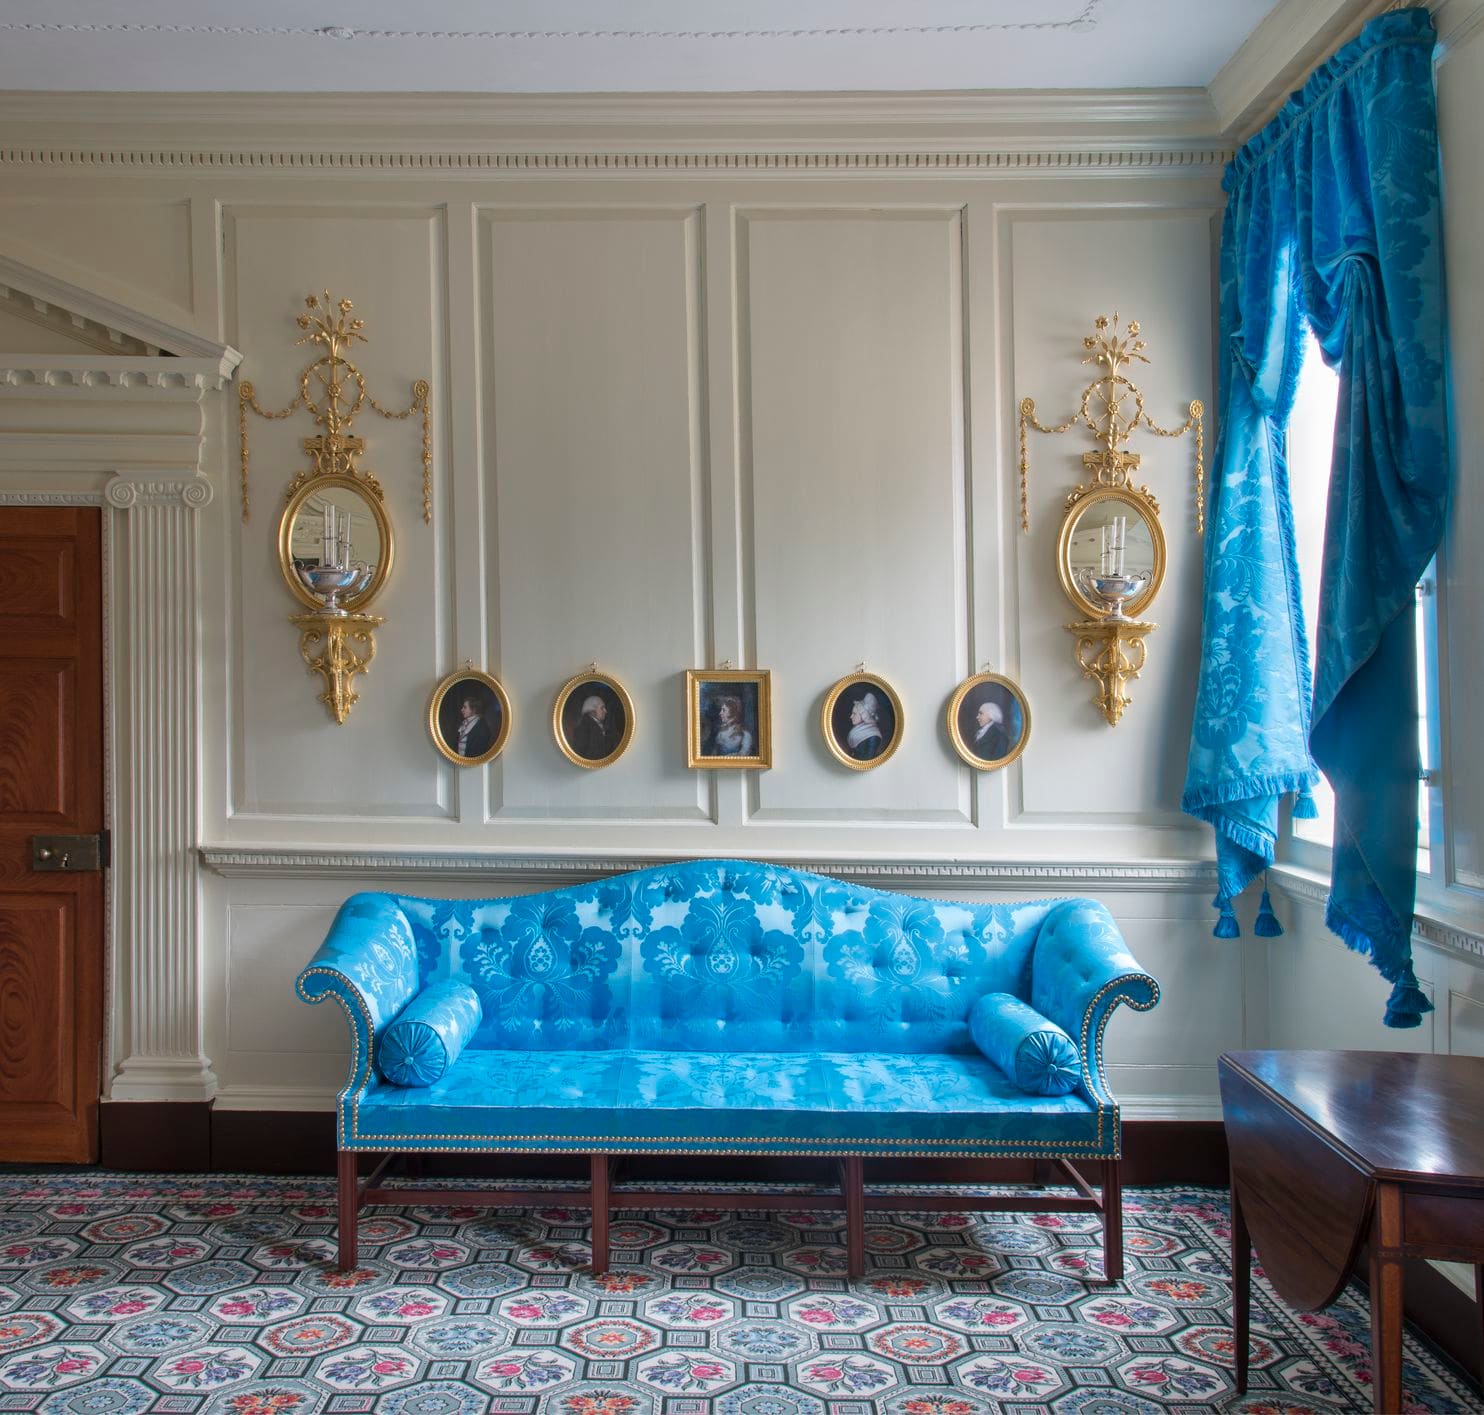 Where George met Sally?  In 1774, the Washingtons purchased a sofa and eight chairs covered with "Saxon blue" from their neighbors, Lord Fairfax and his beautiful wife Sally, who had been an early love interest of young Col. Washington.